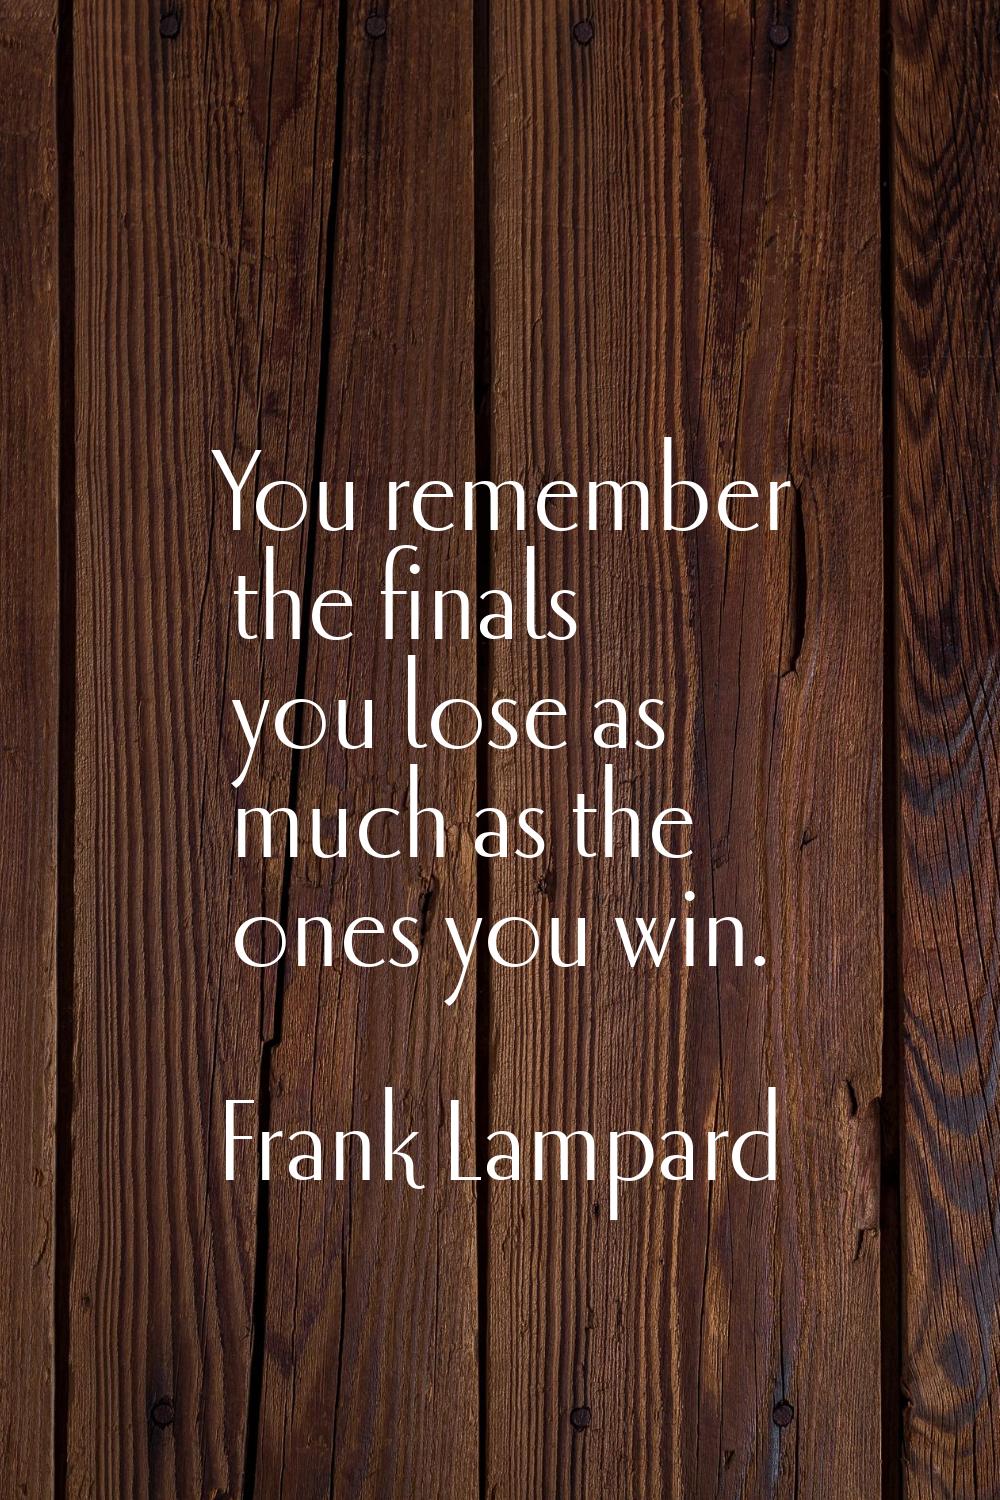 You remember the finals you lose as much as the ones you win.